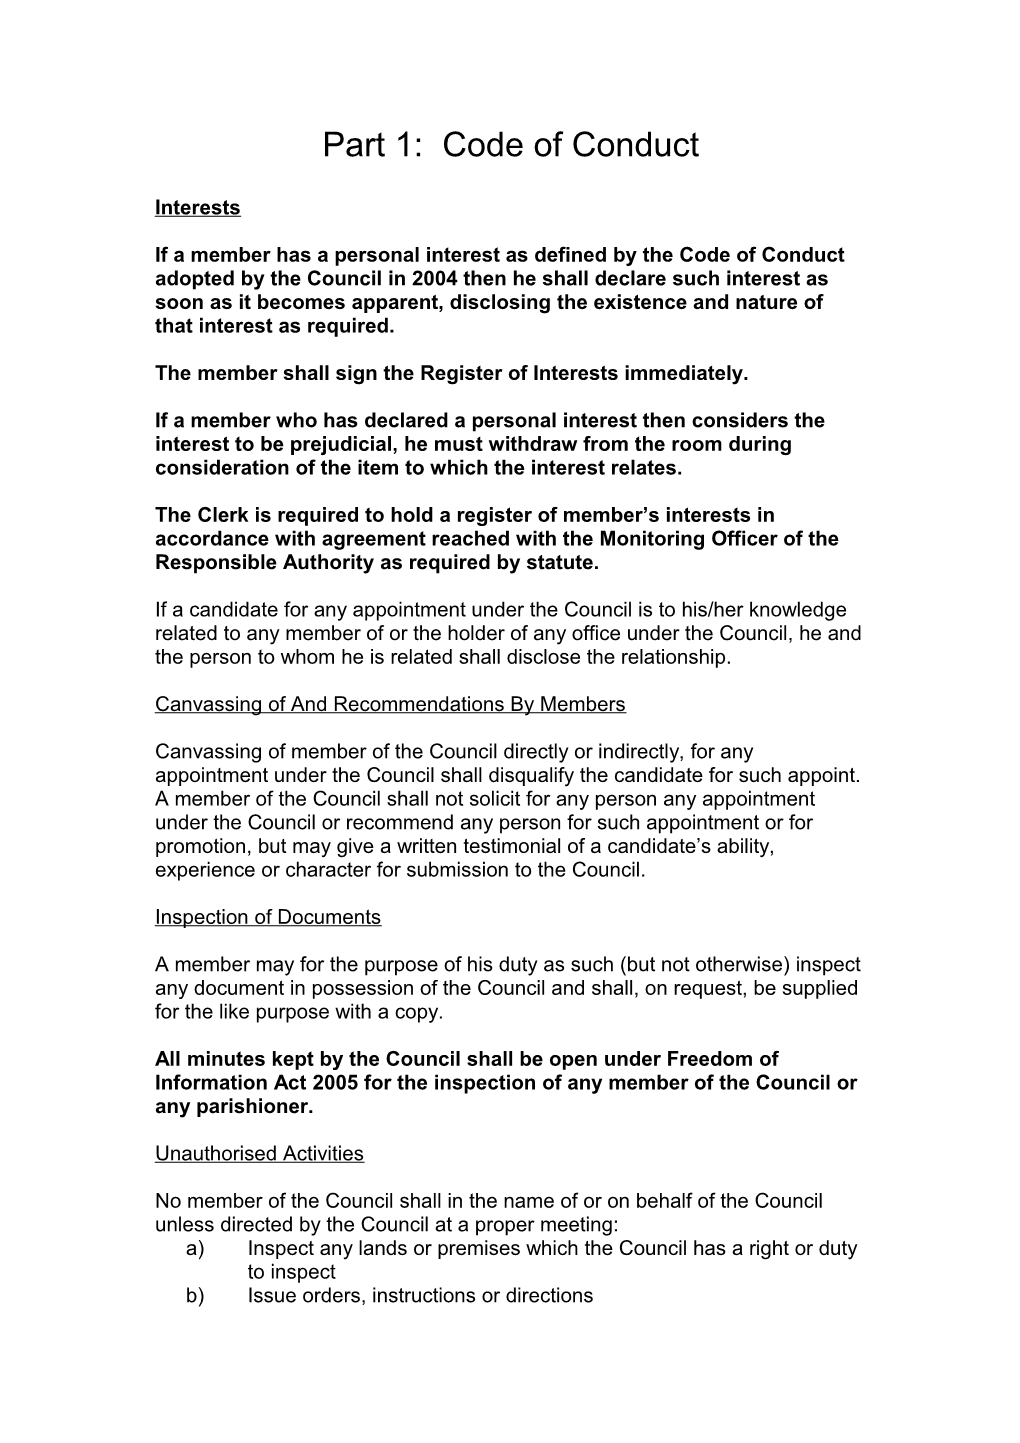 Part 11: Standing Orders for Local Councils Pages 4 - 12